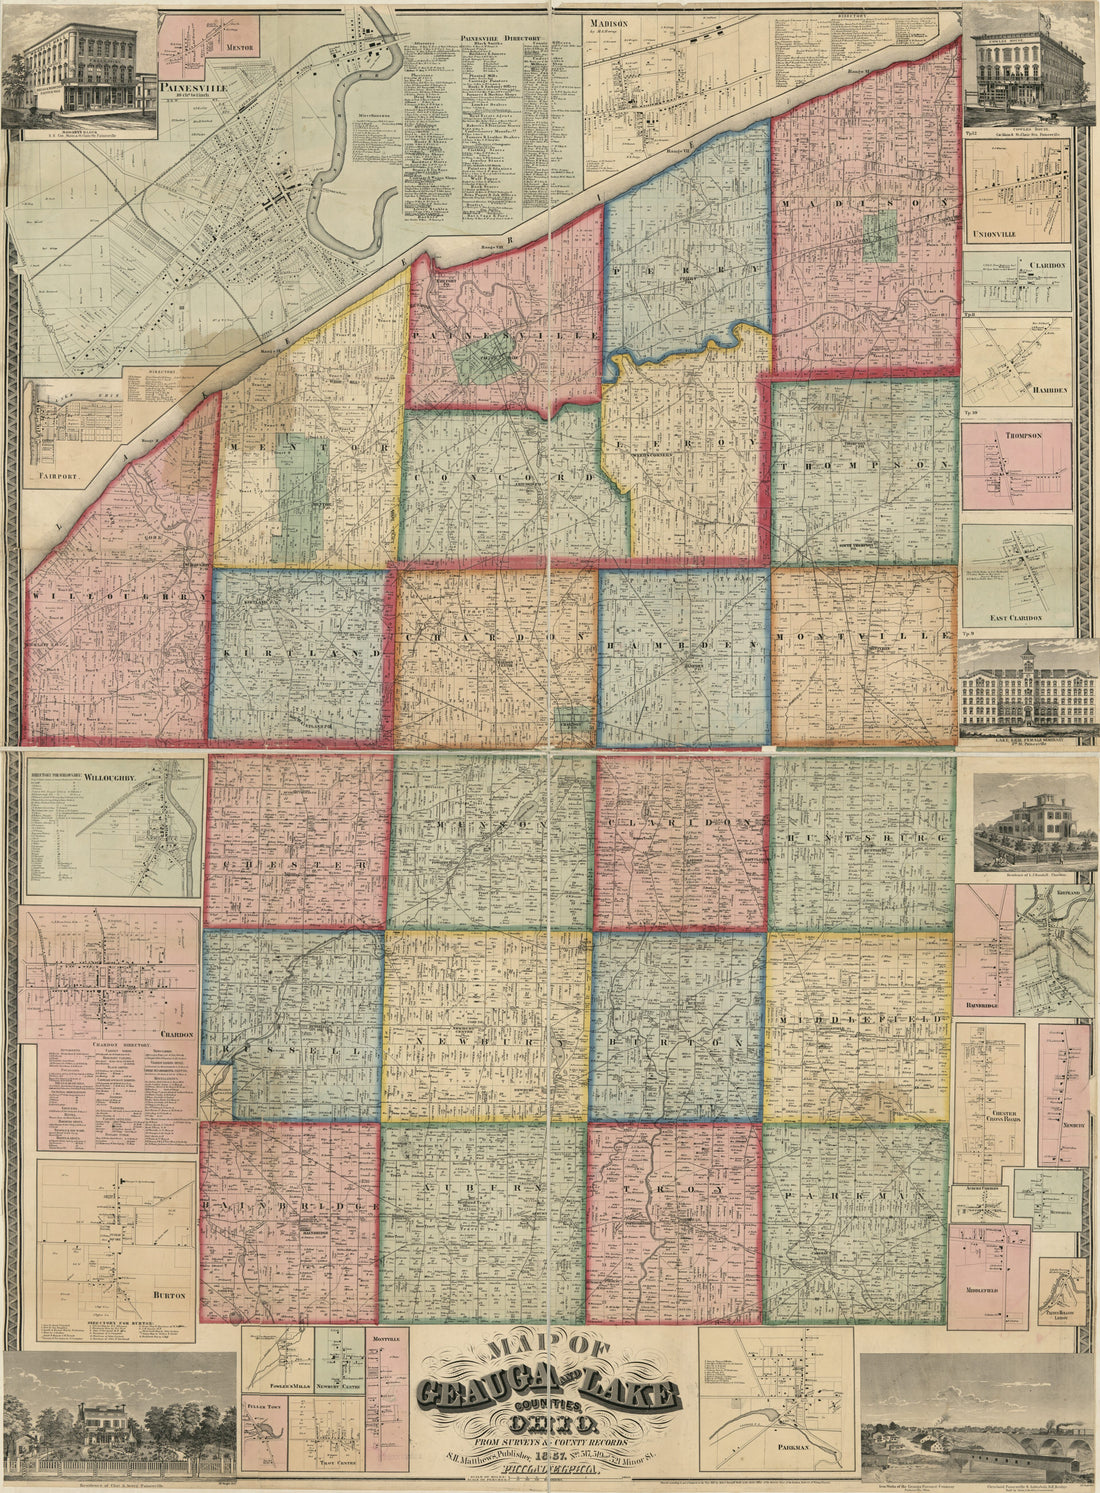 This old map of Map of Geauga and Lake Counties, Ohio from 1857 was created by Robert Pearsall Smith in 1857